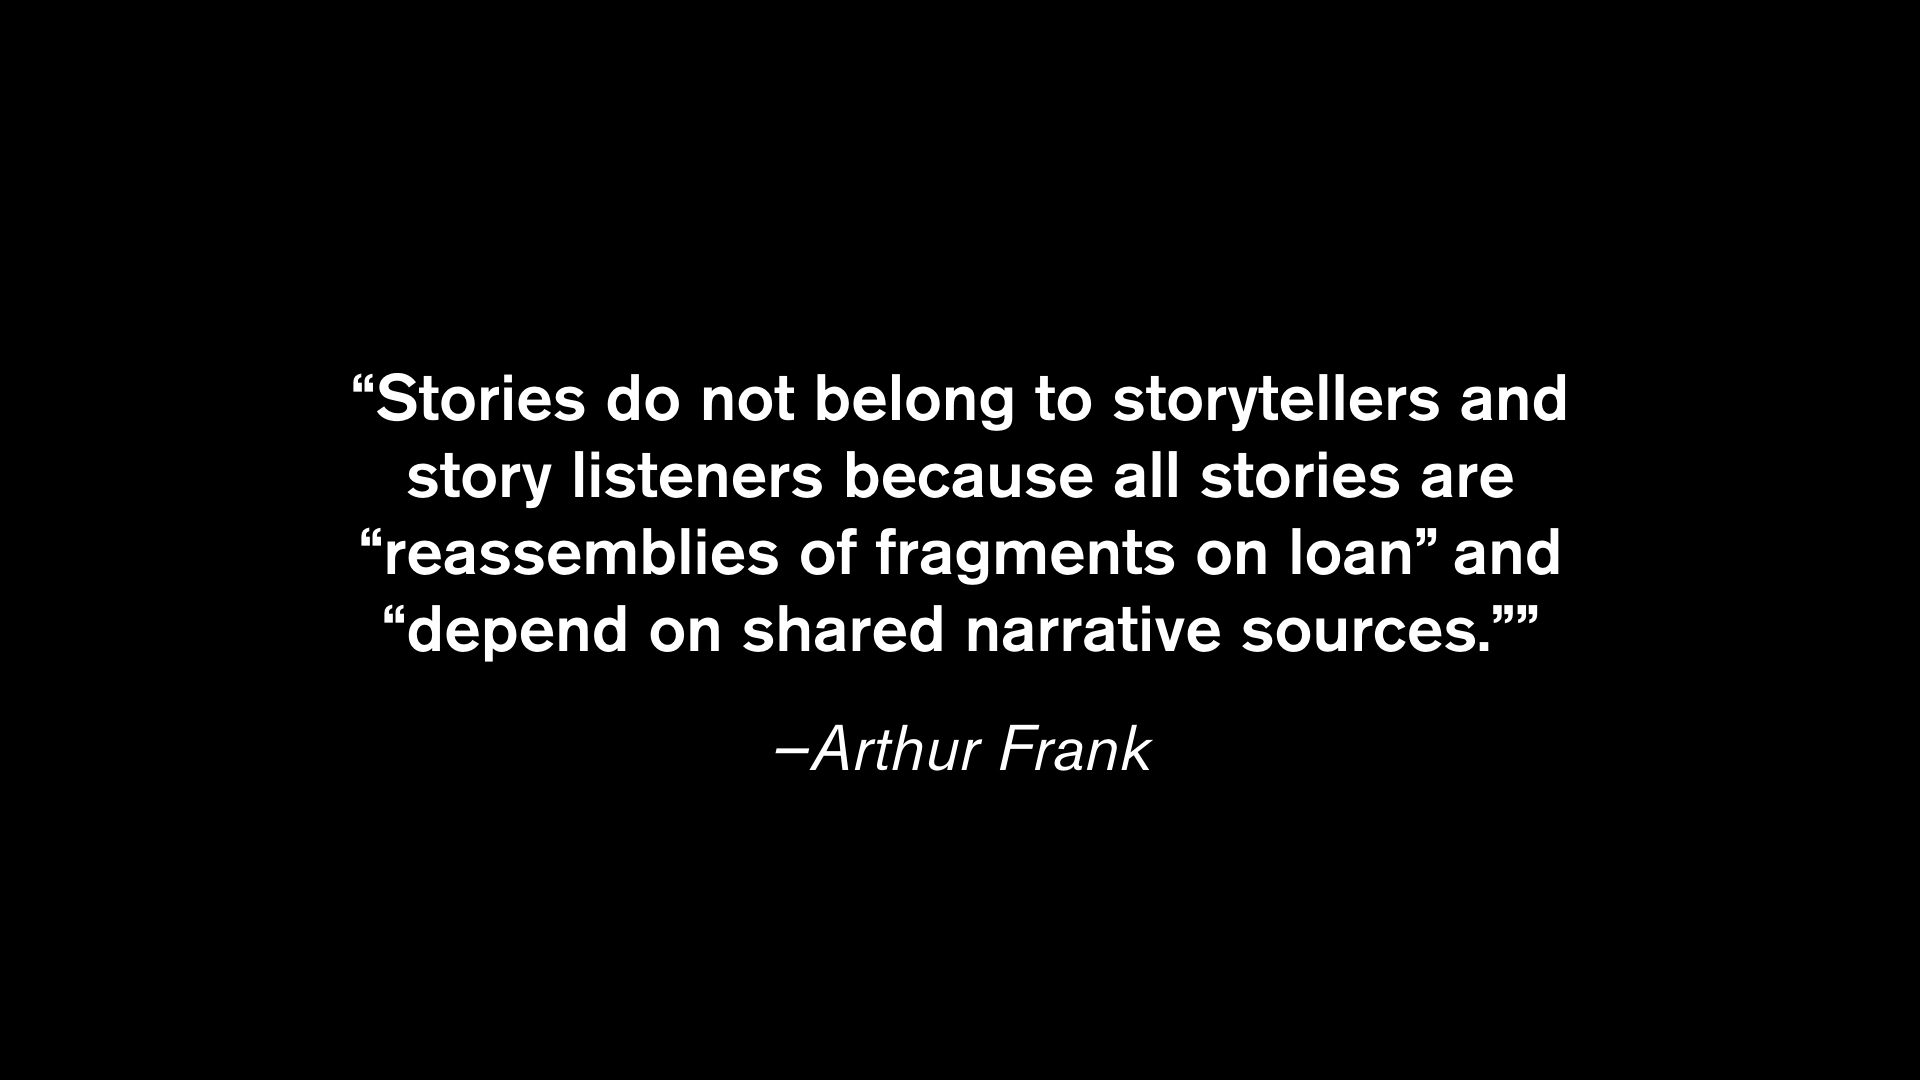 Stories do not belong to storytellers and story listeners because all stories are “reassemblies of fragments on loan” and “depend on shared narrative sources.”